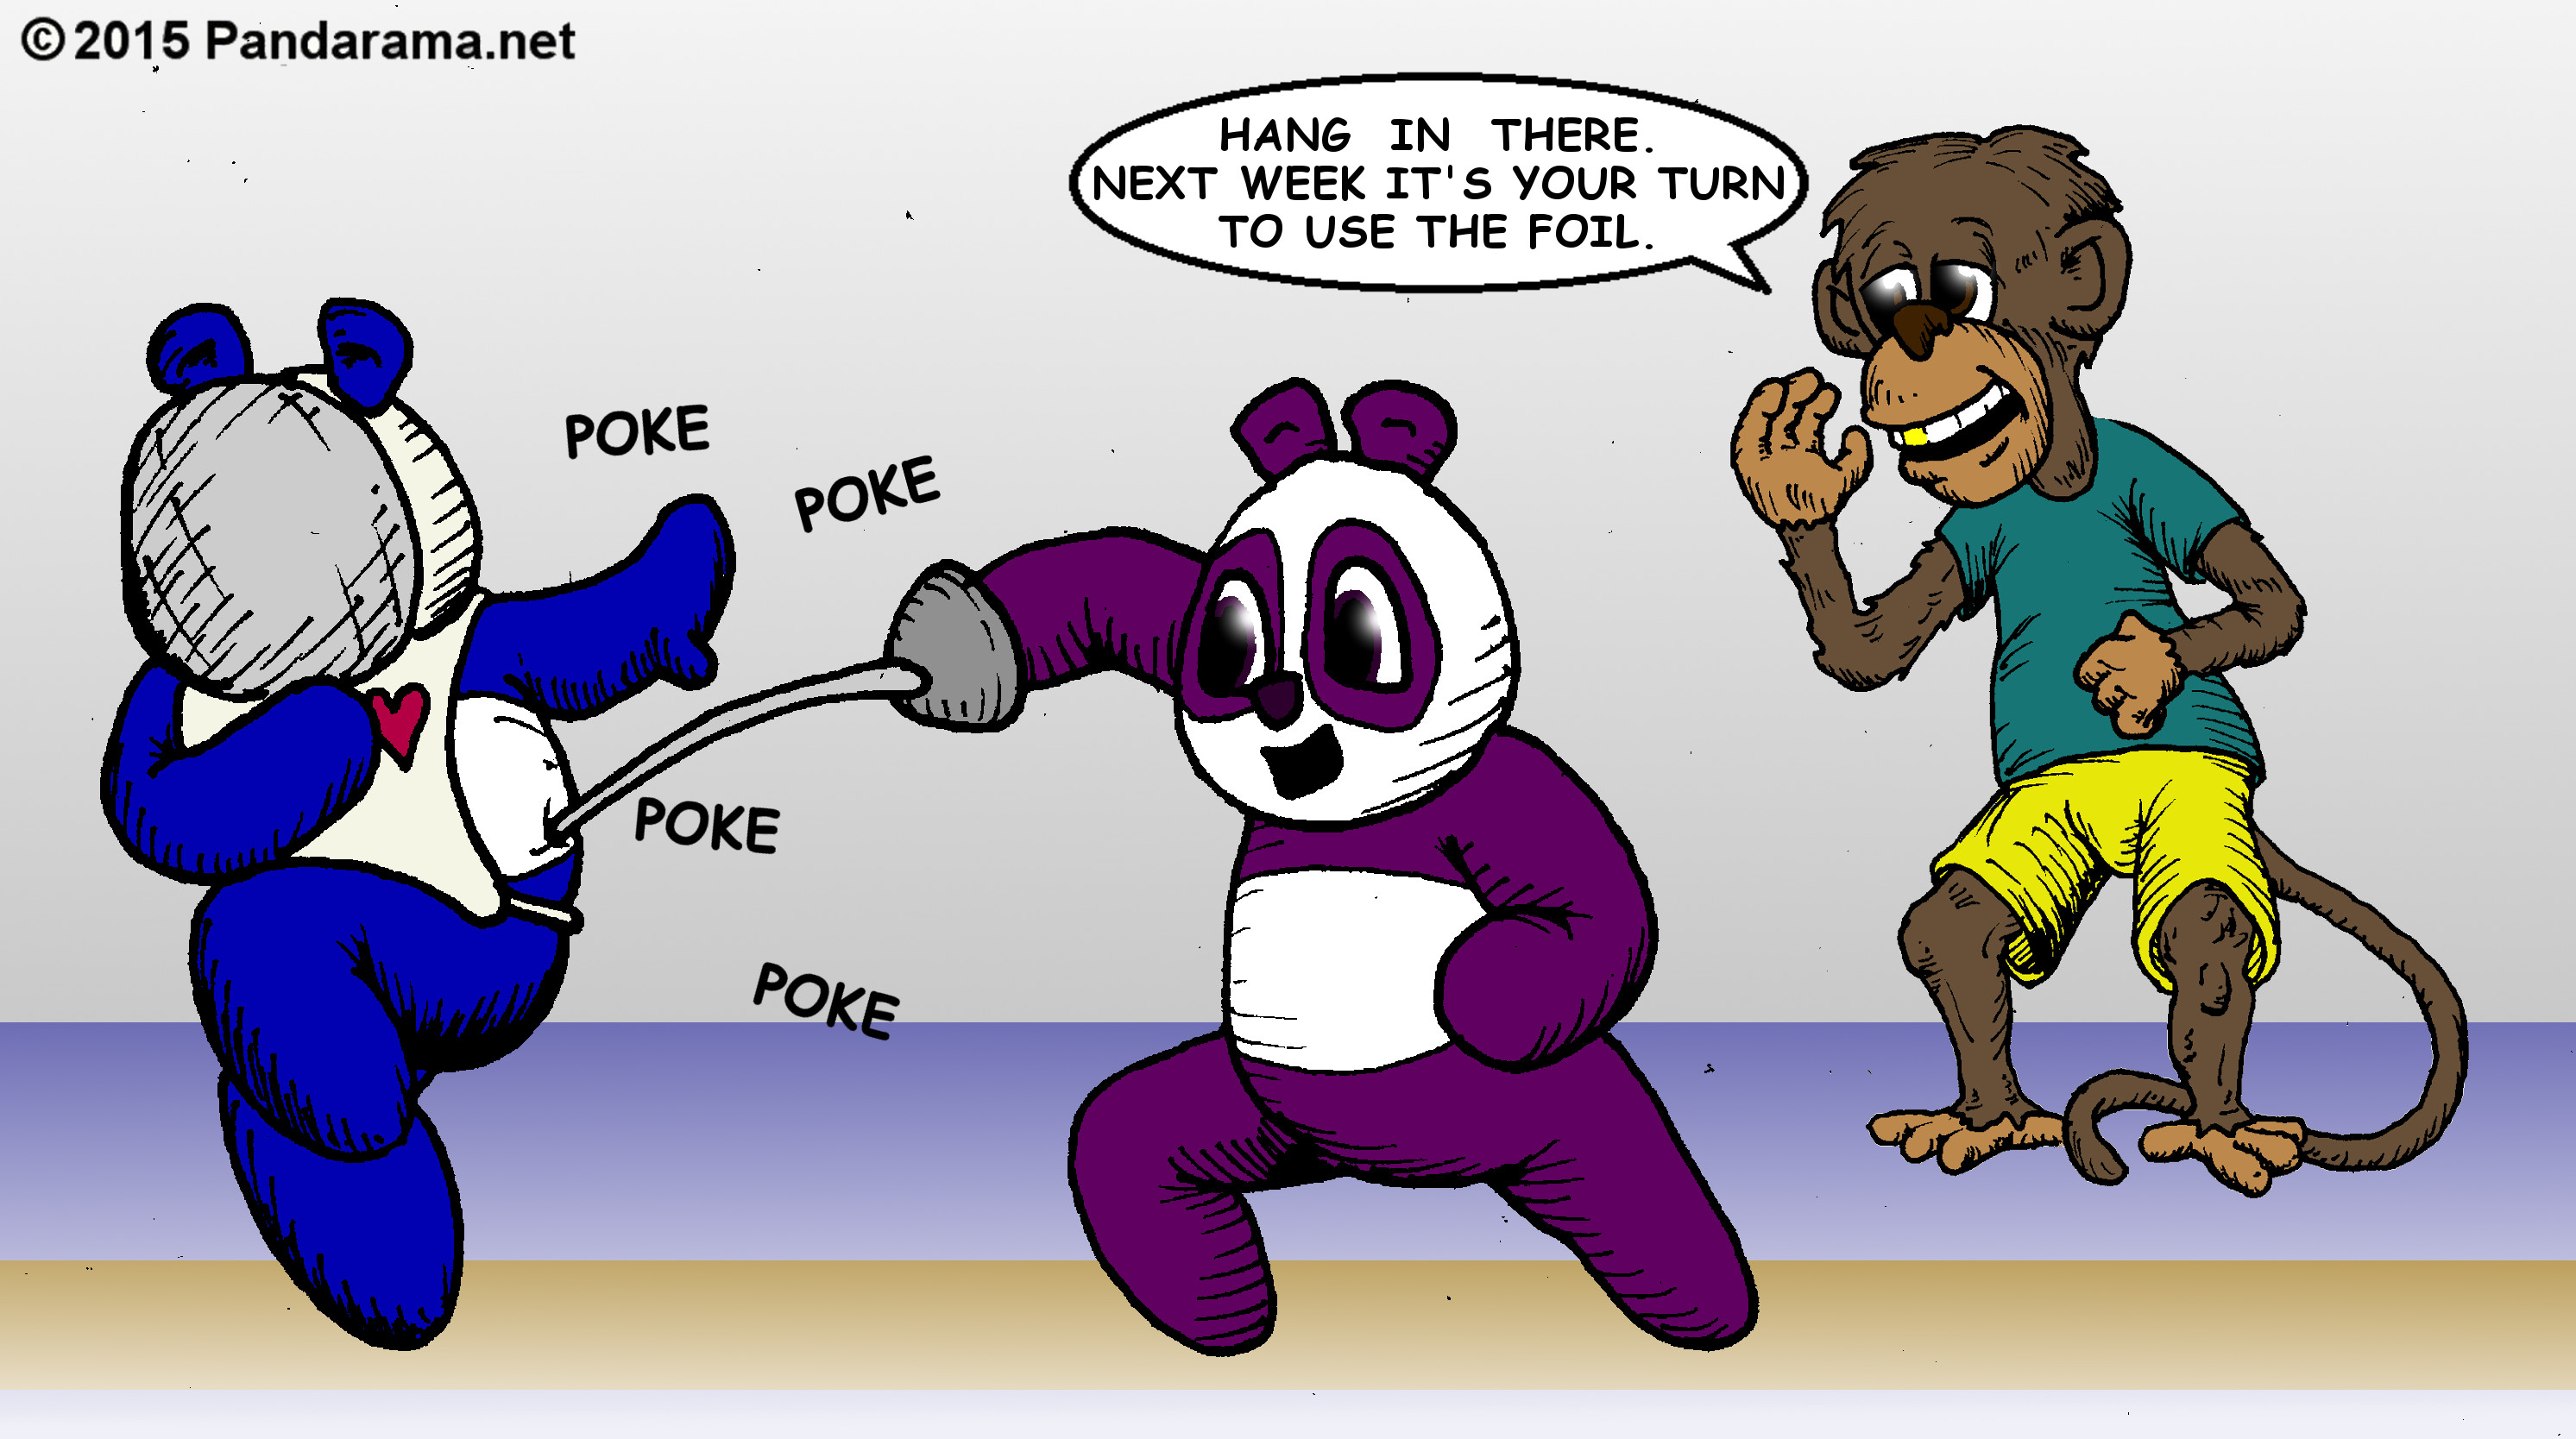 fencing cartoon. panda poke image. poking image. one panda pokes an unarmed panda repeatedly with a fencing foil and the coach says encourages the poked panda to hang in there because the rolls will be reversed next week.